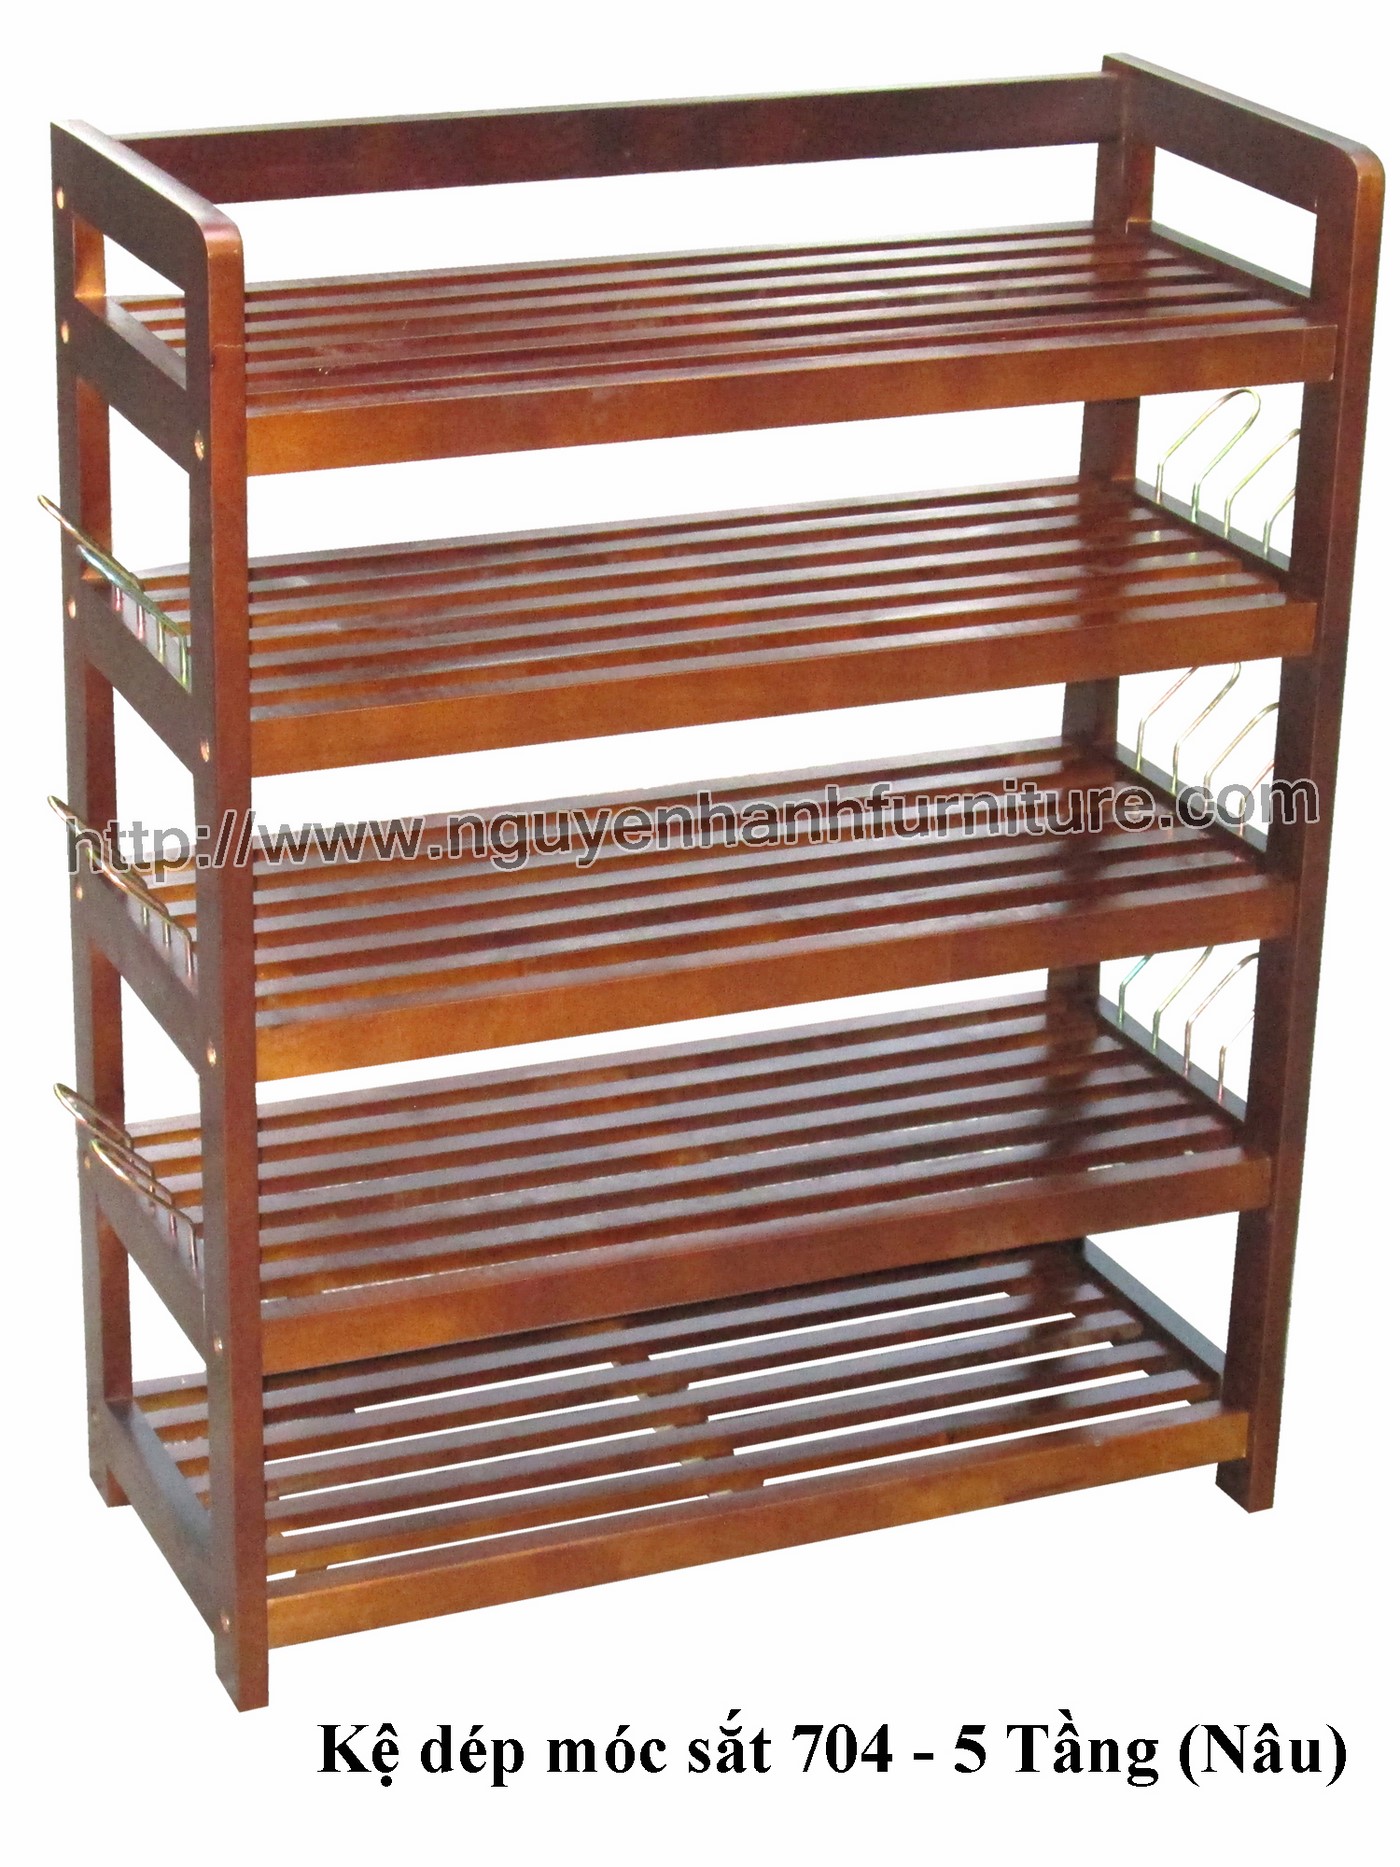 Name product: Shoeshelf with iron hooks 704 (Brown) - Dimensions: 63 x 30 x 79 (H) - Description: Wood natural rubber 